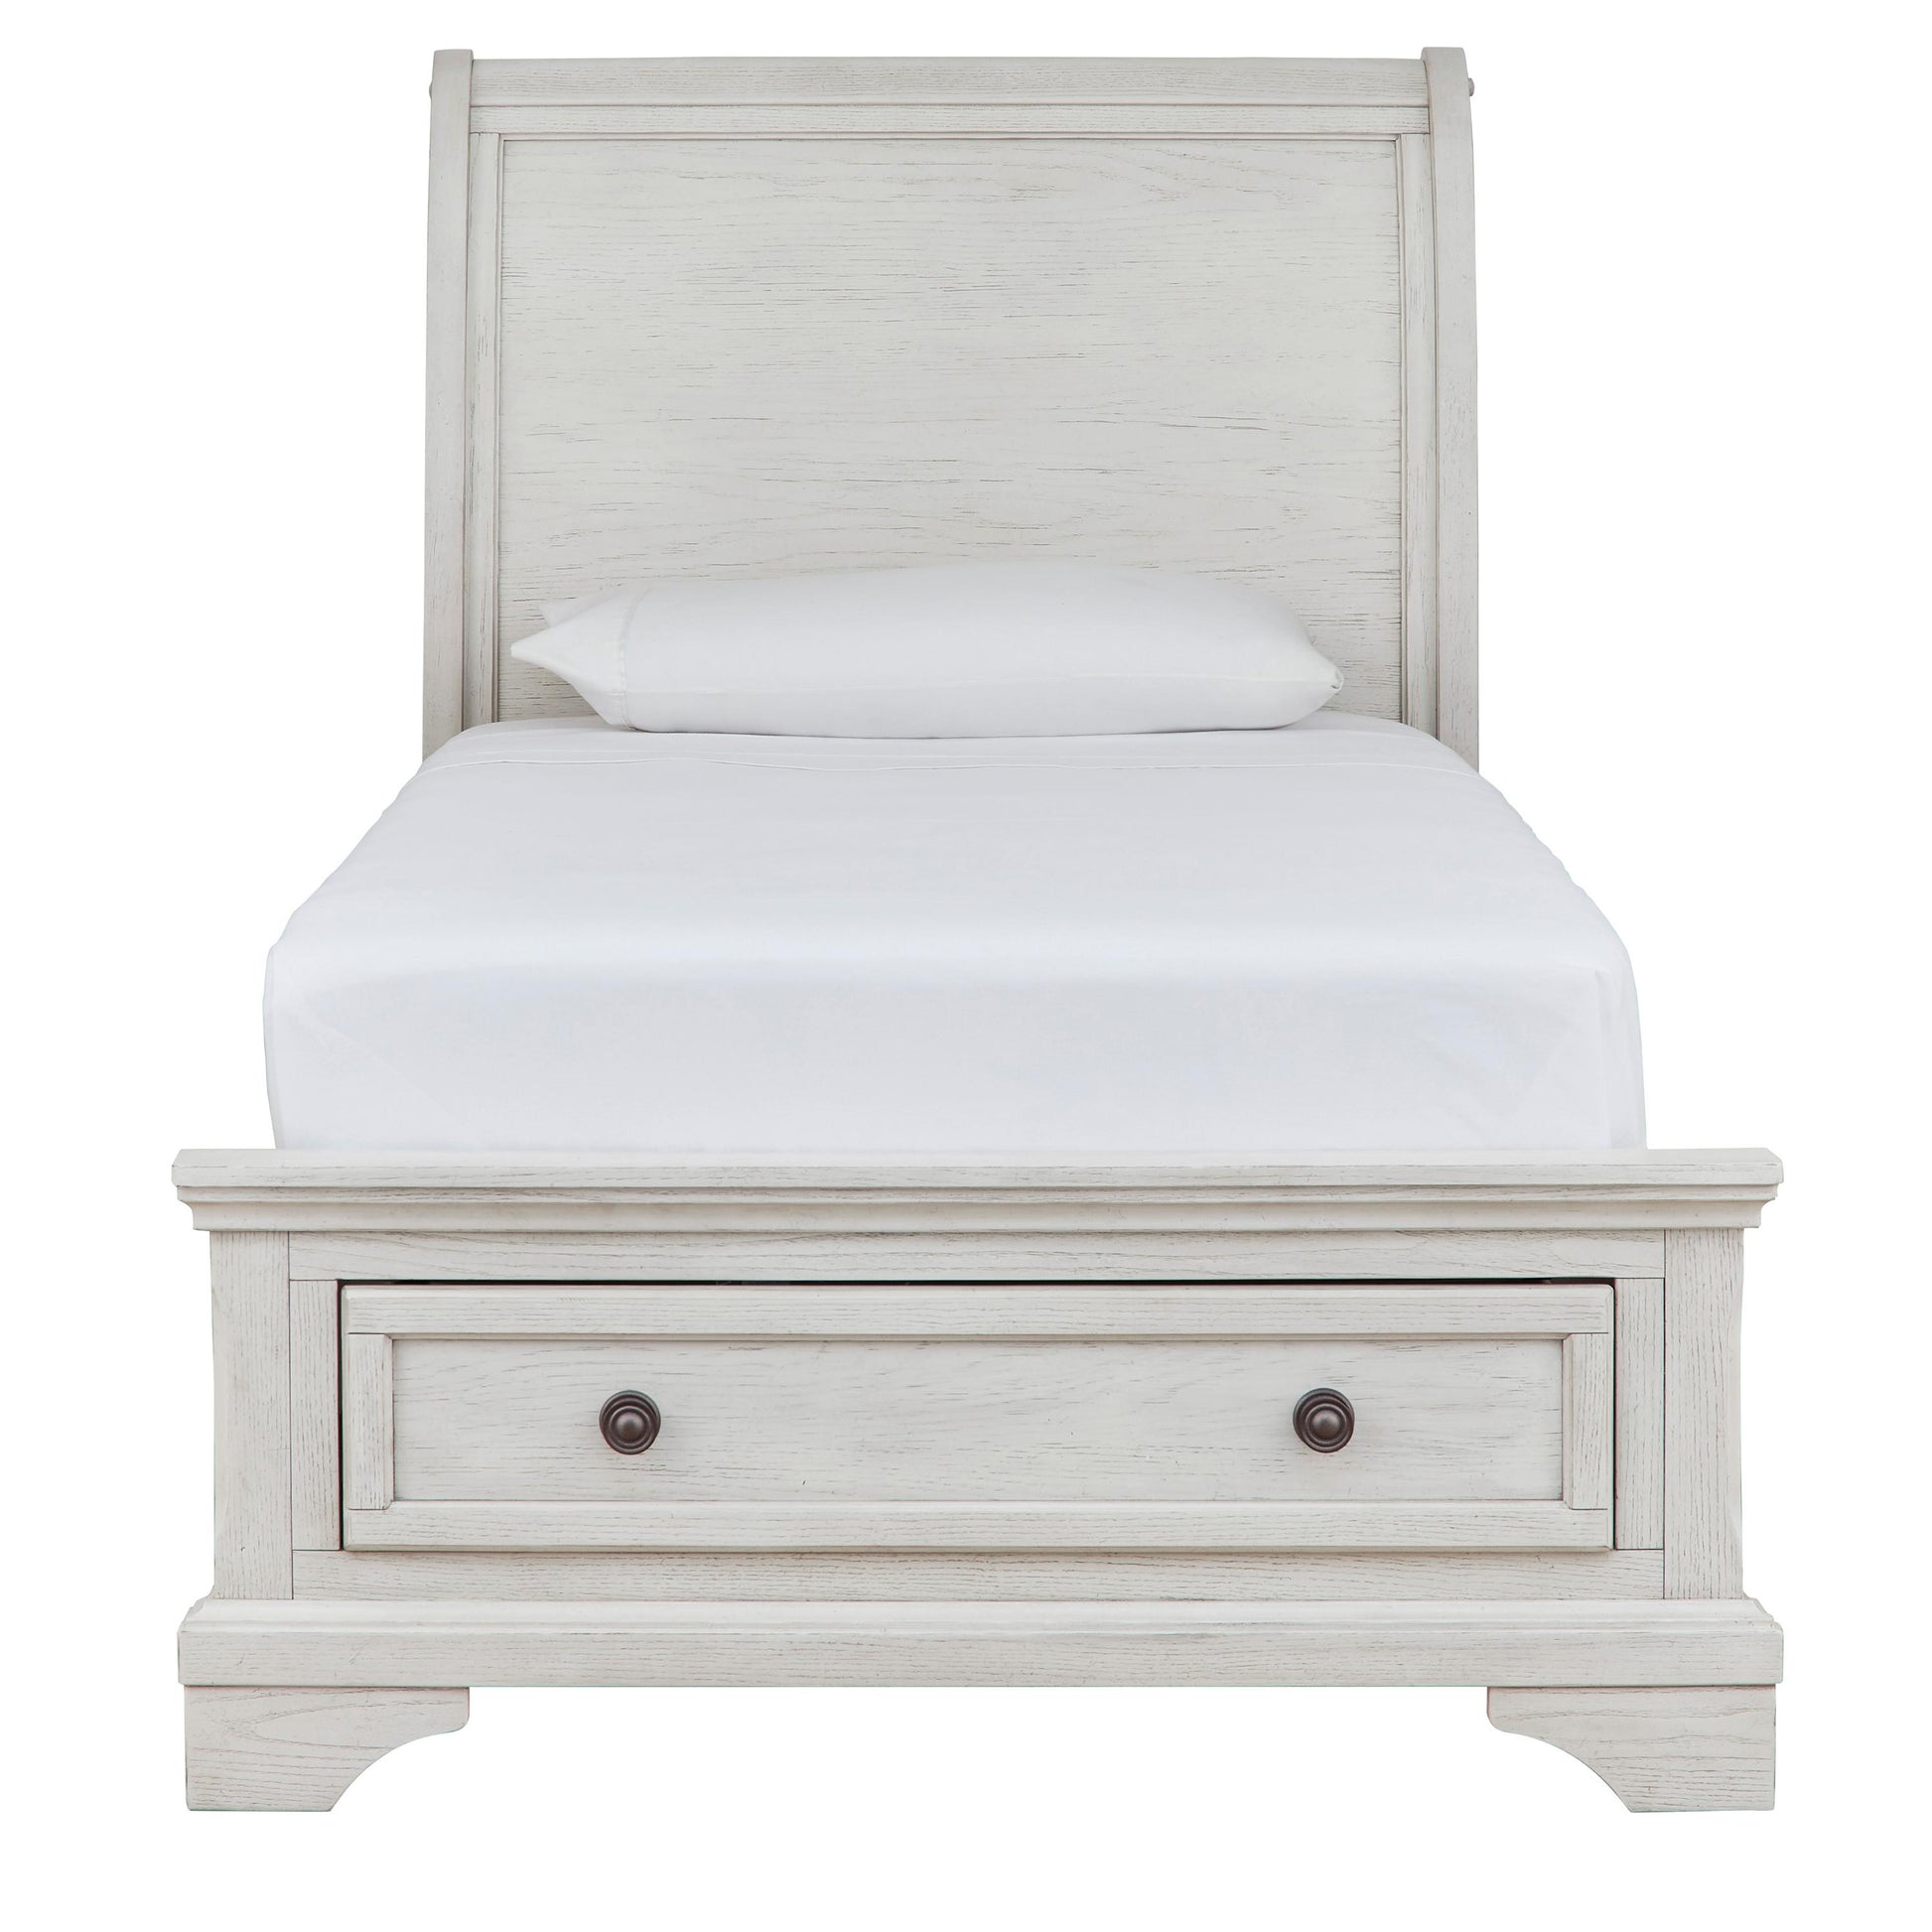 Signature Design by Ashley Kids Beds Bed B742-53/B742-52S/B742-183 IMAGE 2